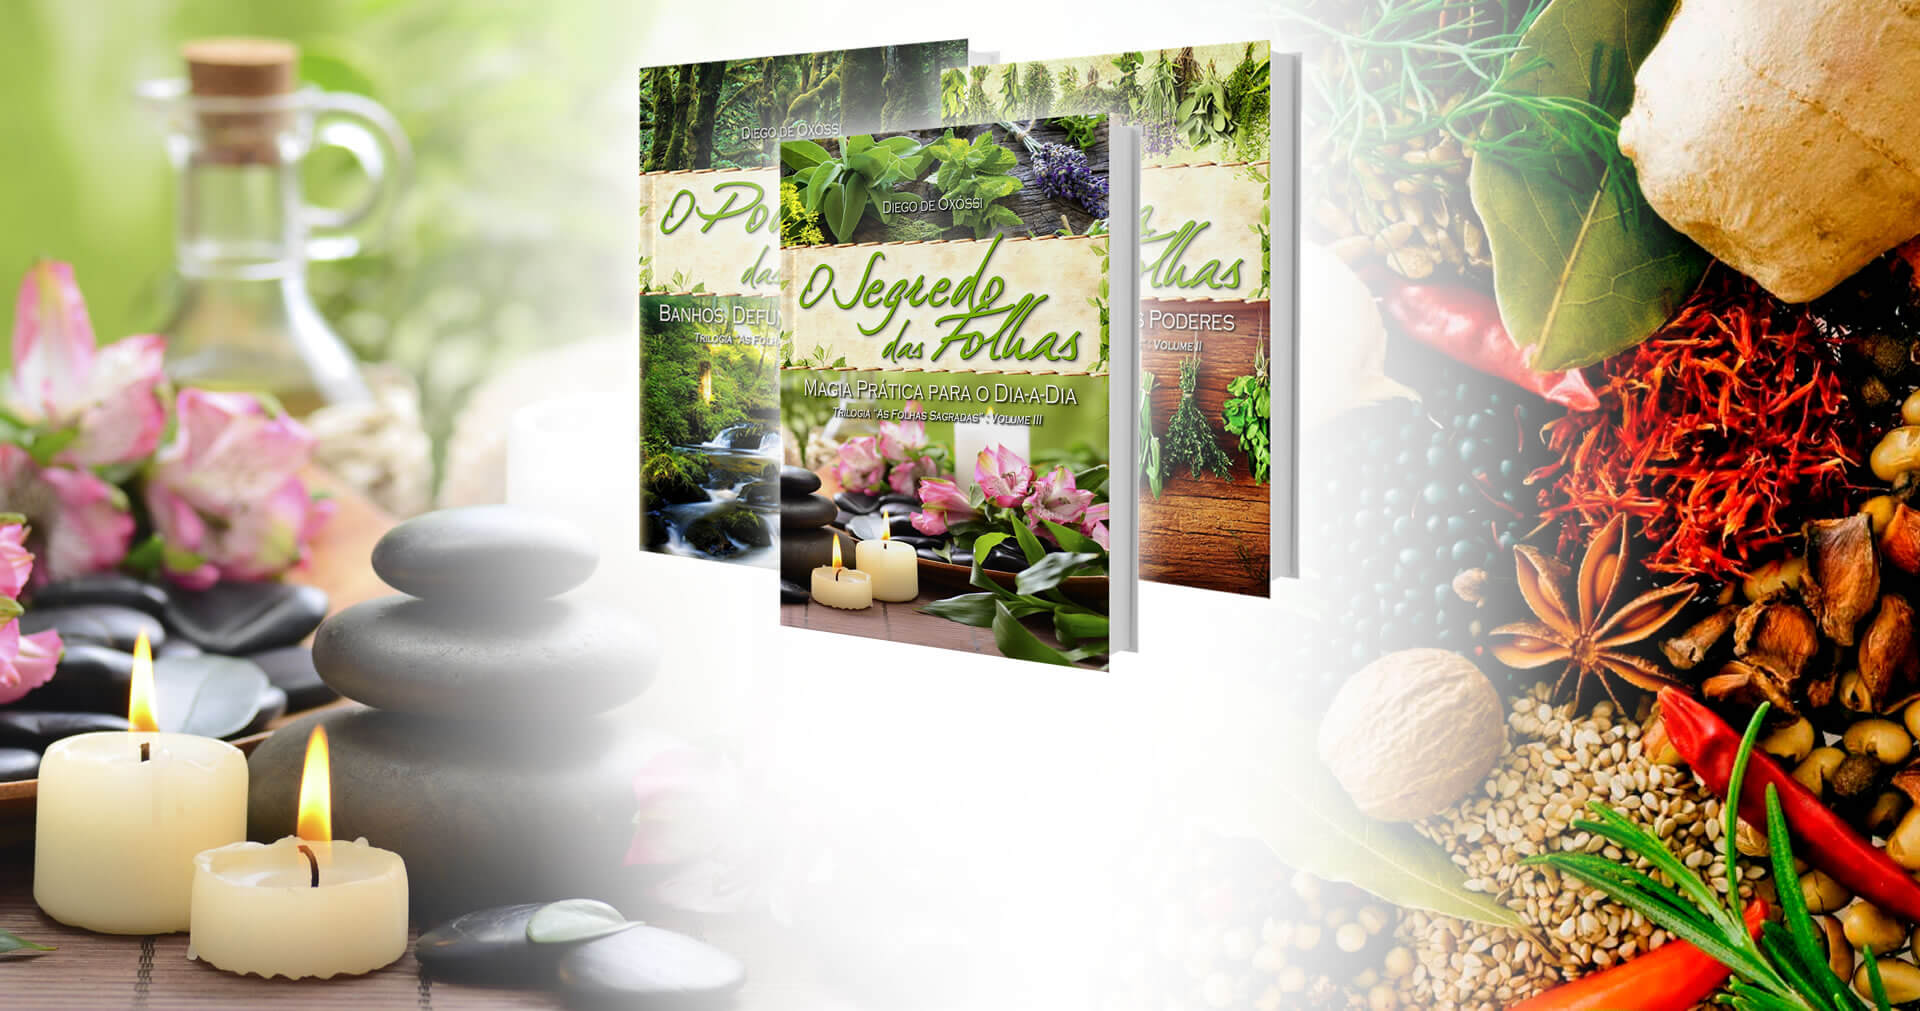 Desvendando Exu | In volume 2 of the collection, babalosha Diego de Oxóssi presents the biggest dictionary of magic herbs in Brazil, with 365 plants in details.